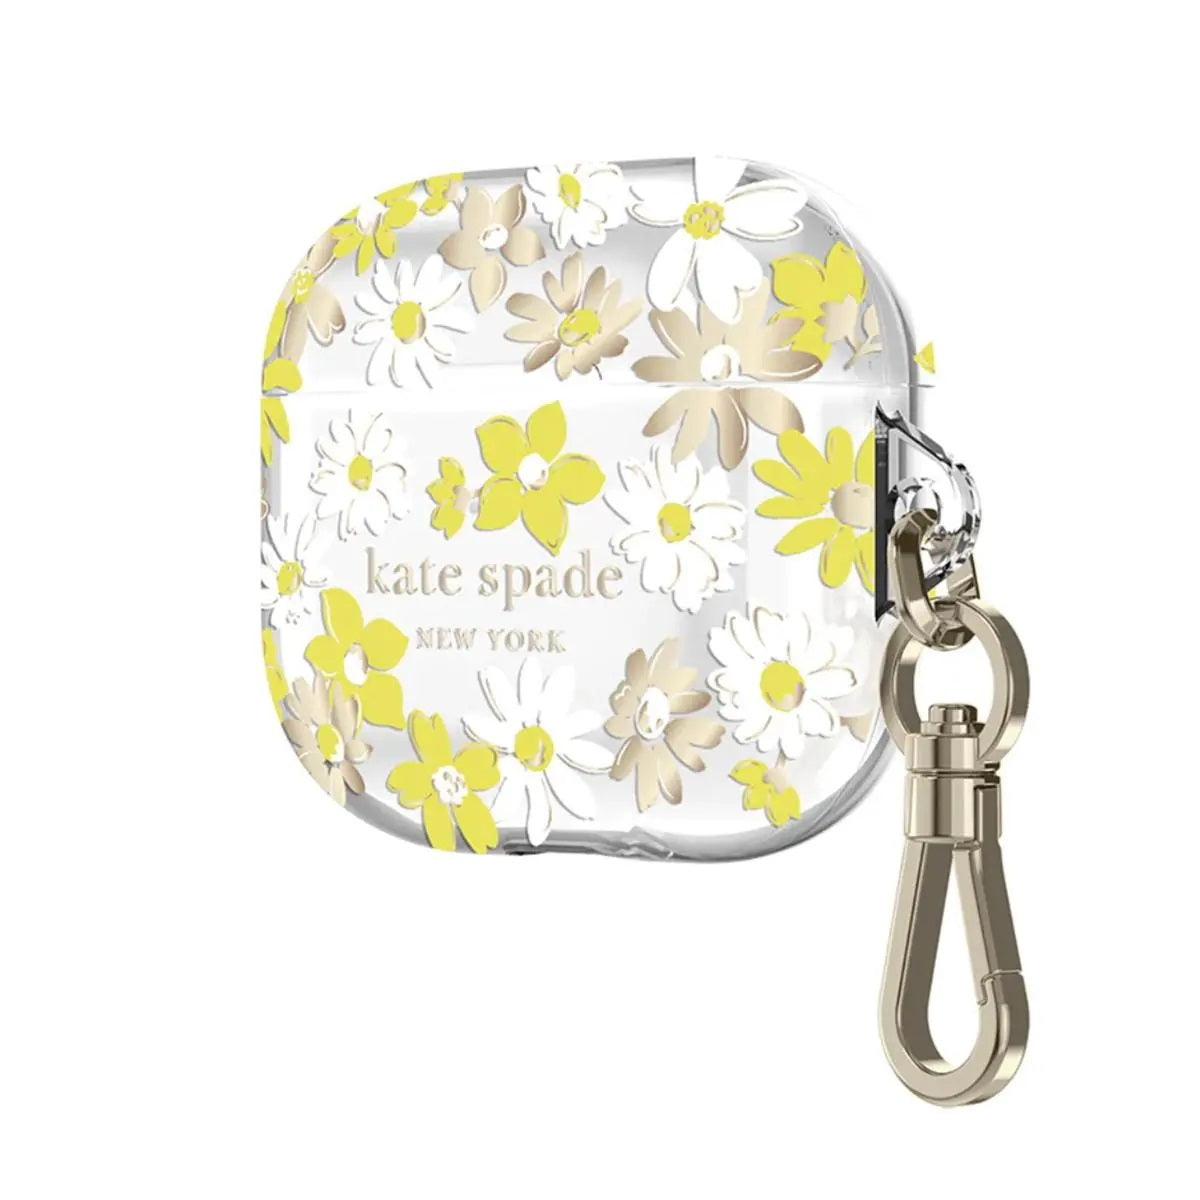 Kate Spade New York Protective AirPods Pro Case (Yellow Floral Medley/Flax Stone/White/Clear/Gold/Gold Logo)